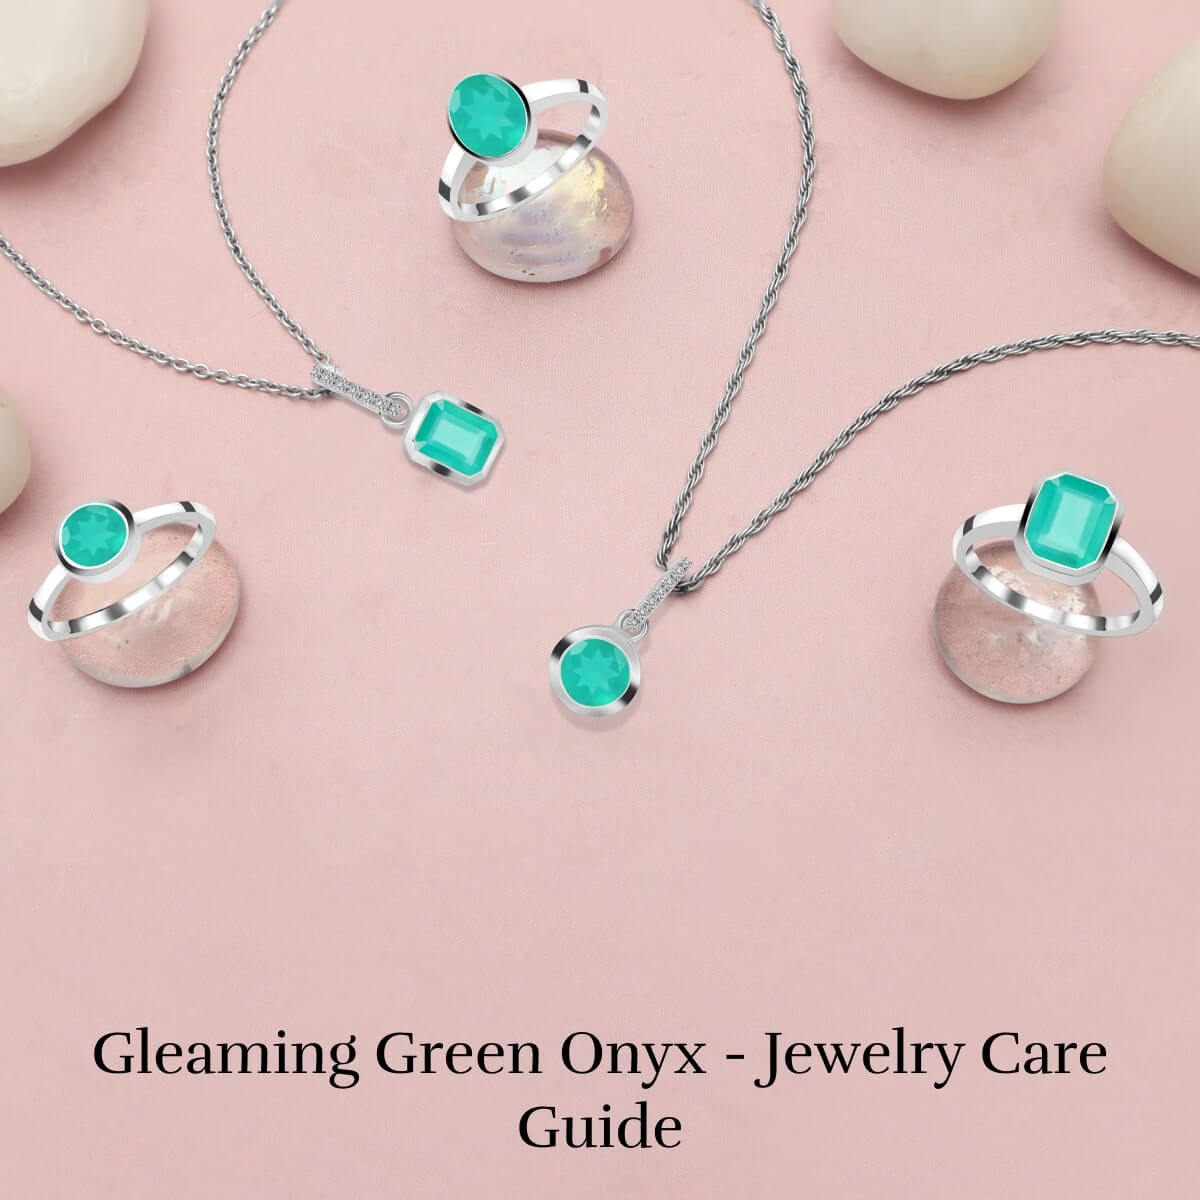 How to Care Your Green Onyx Casting Jewelry